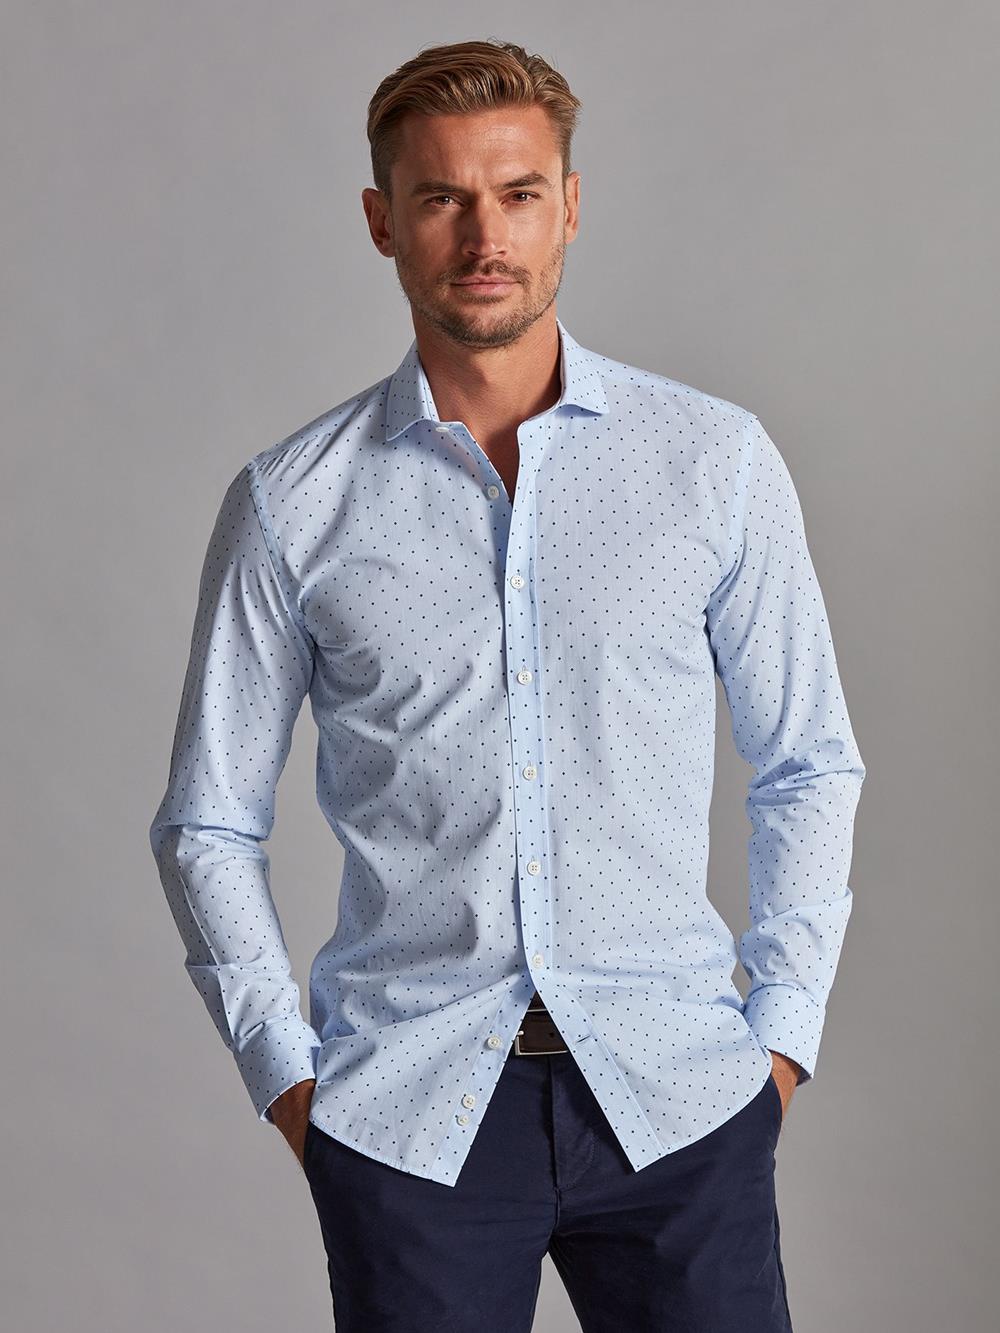 Grady sky blue slim fit shirt with printed pattern - Extra long sleeves